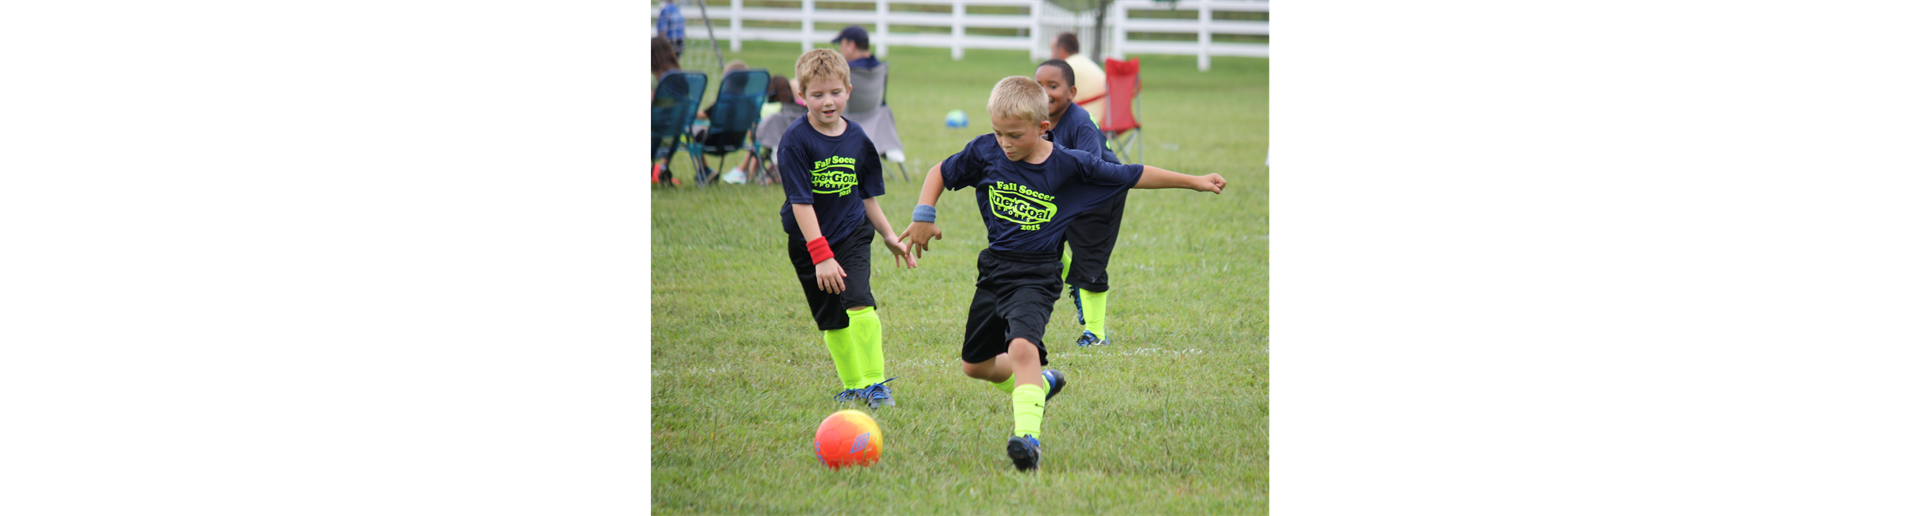 Fall Soccer (Ages 3-12)